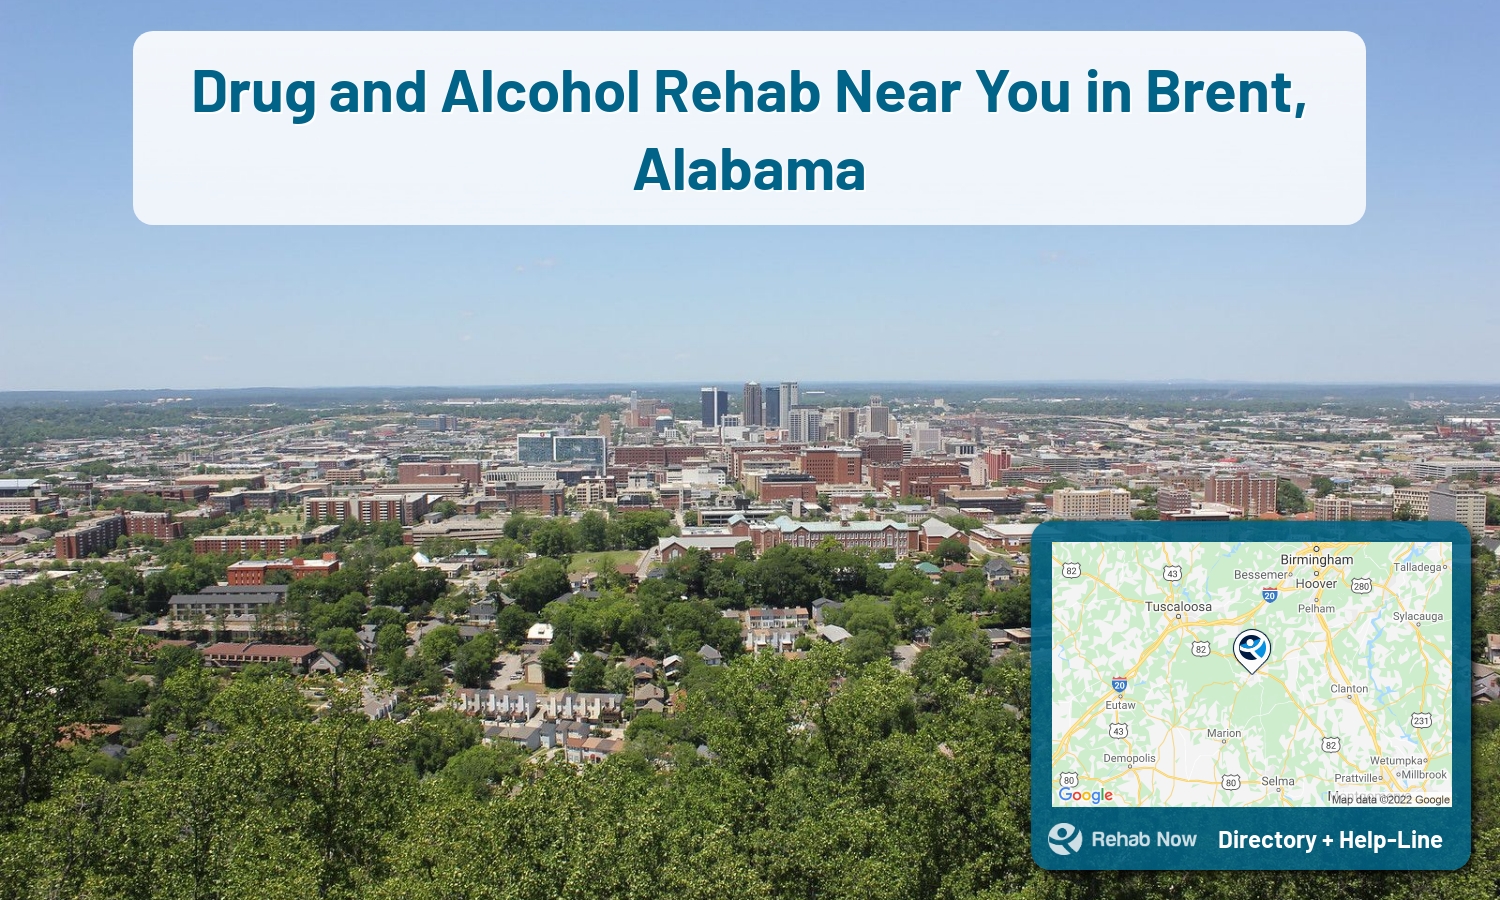 Drug rehab and alcohol treatment services near you in Brent, Alabama. Need help choosing a center? Call us, free.